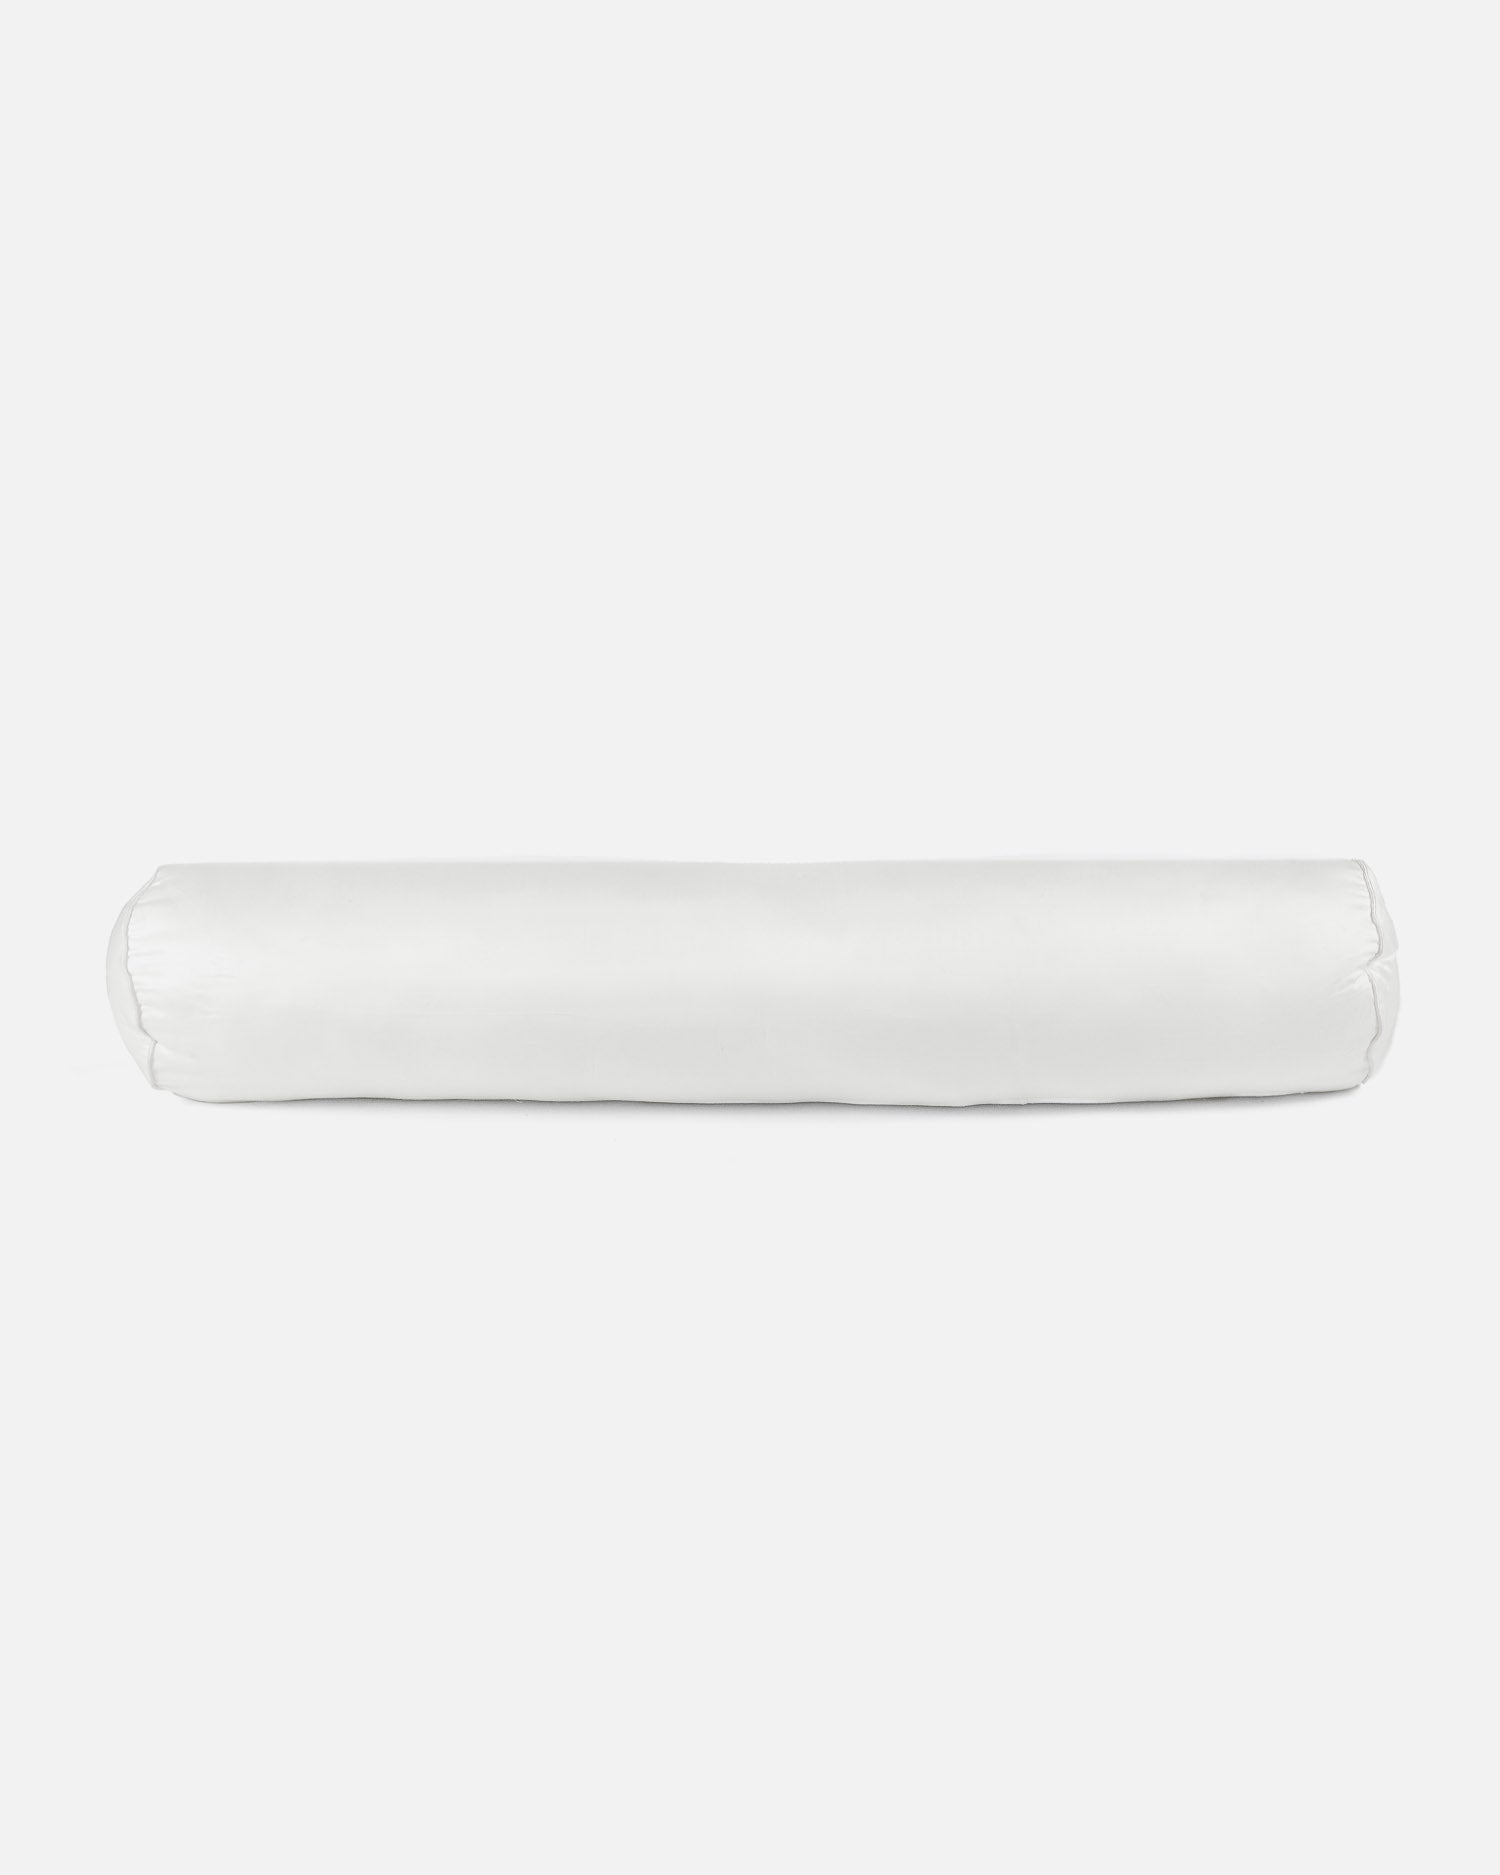 ava and ava philippines ph organic bamboo lyocell bolster pillow  / hotdog pillow / long pillow / po-tsim pillow in white with piped edges